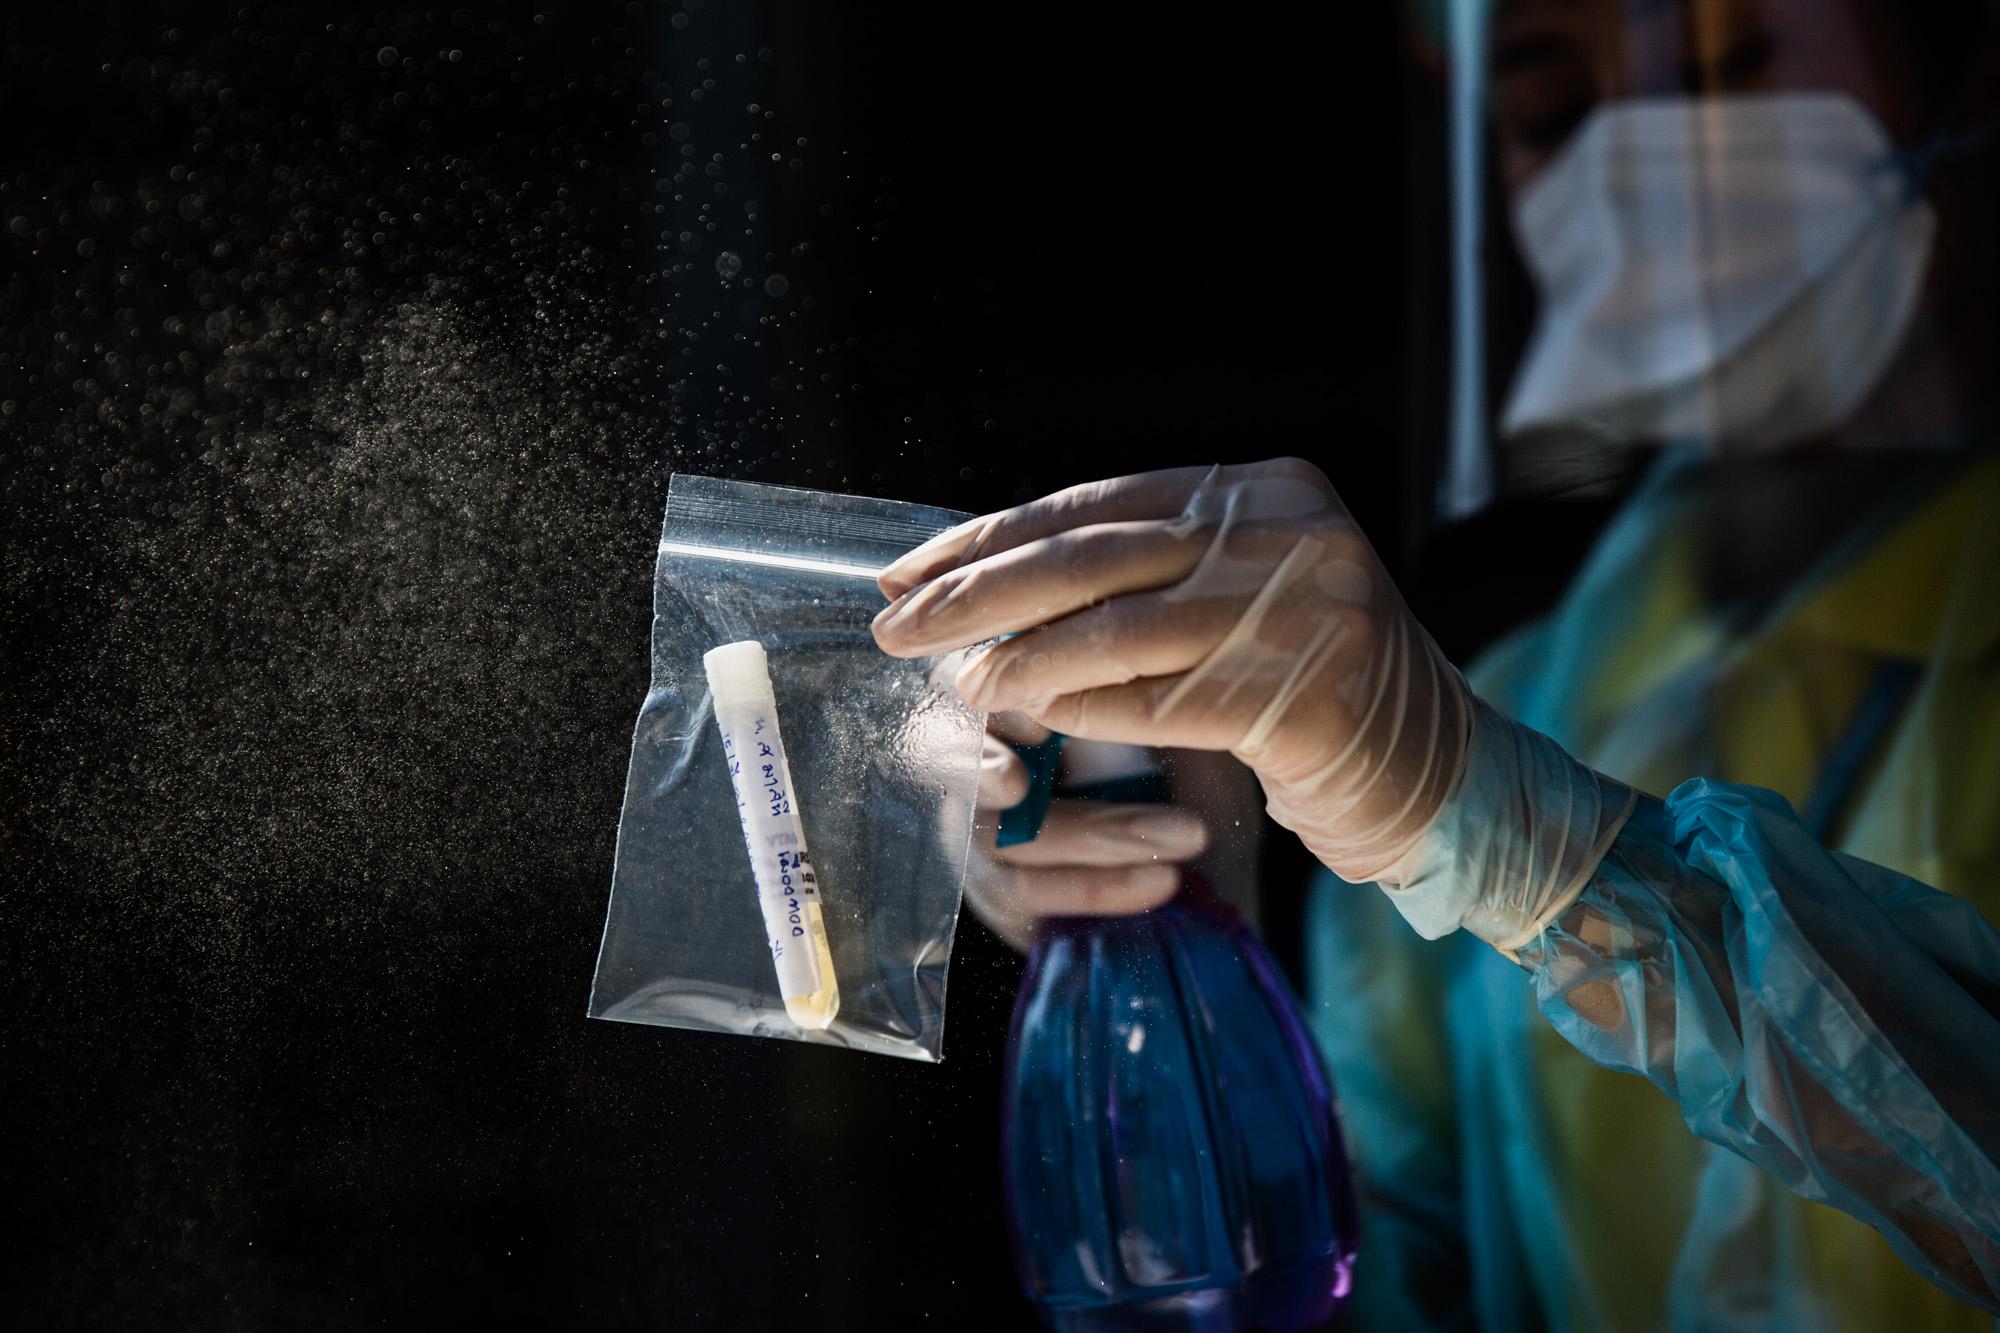 Covid-19: Thailand - A health worker disinfects a Covid-19 swab test sample...